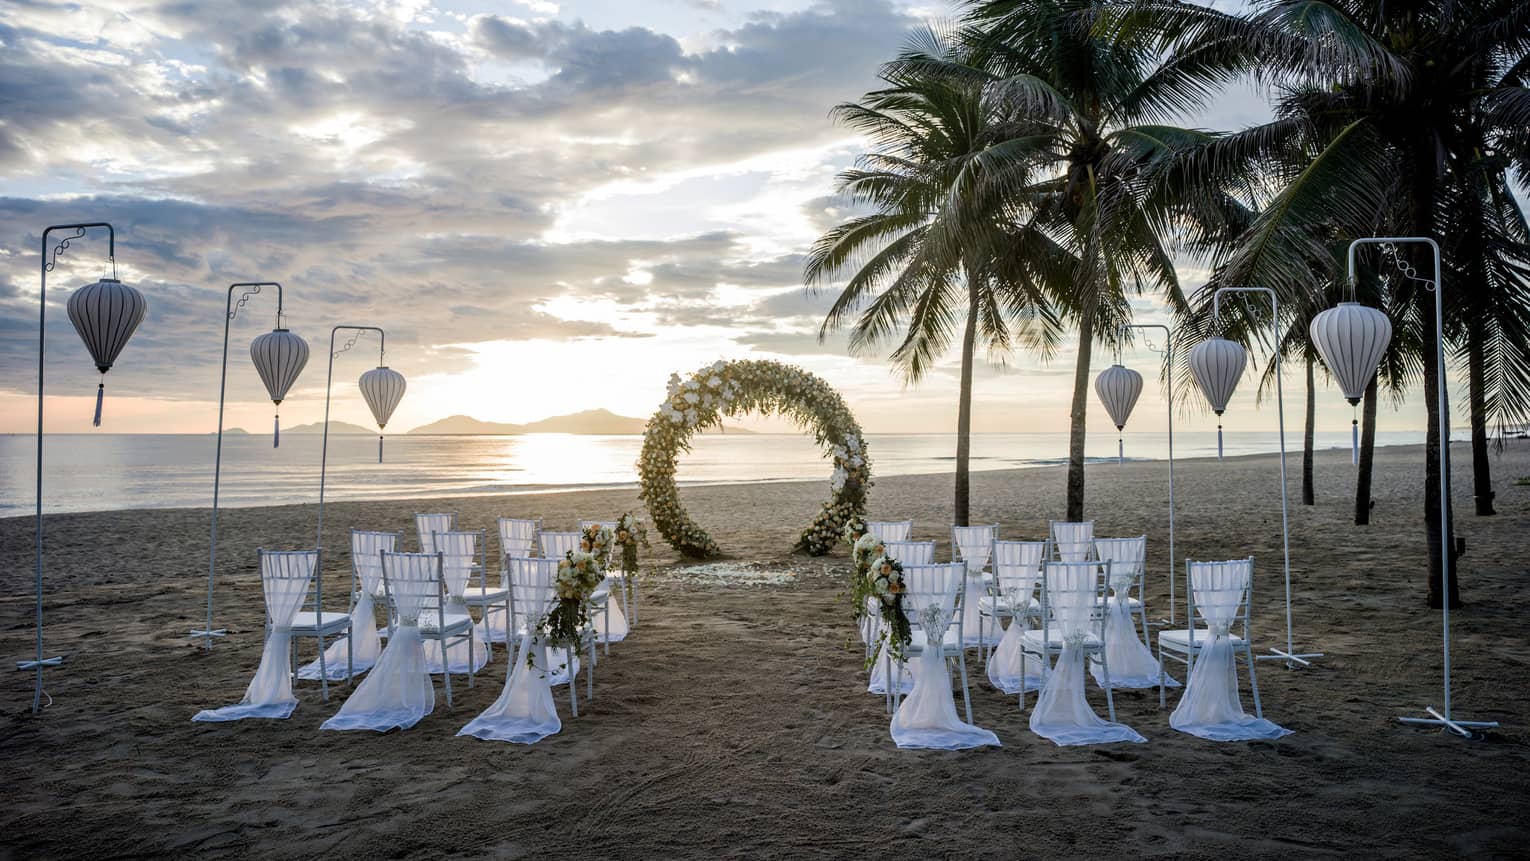 Rows of white chairs face round wedding altar on sand beach at sunset